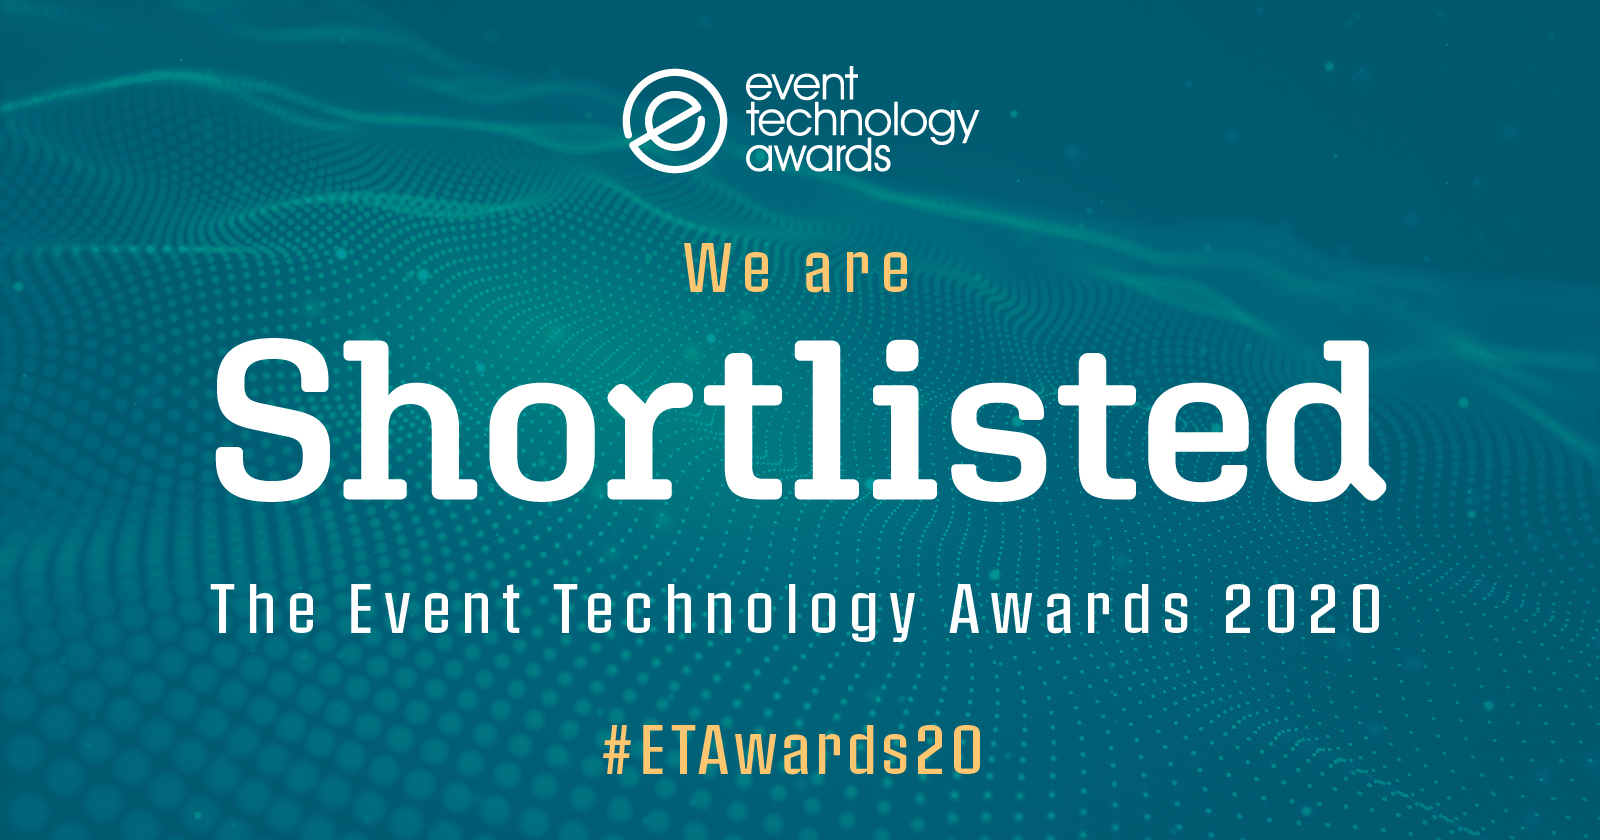 Attendease is Nominated in 5 Categories for the Event Tech Awards 2020